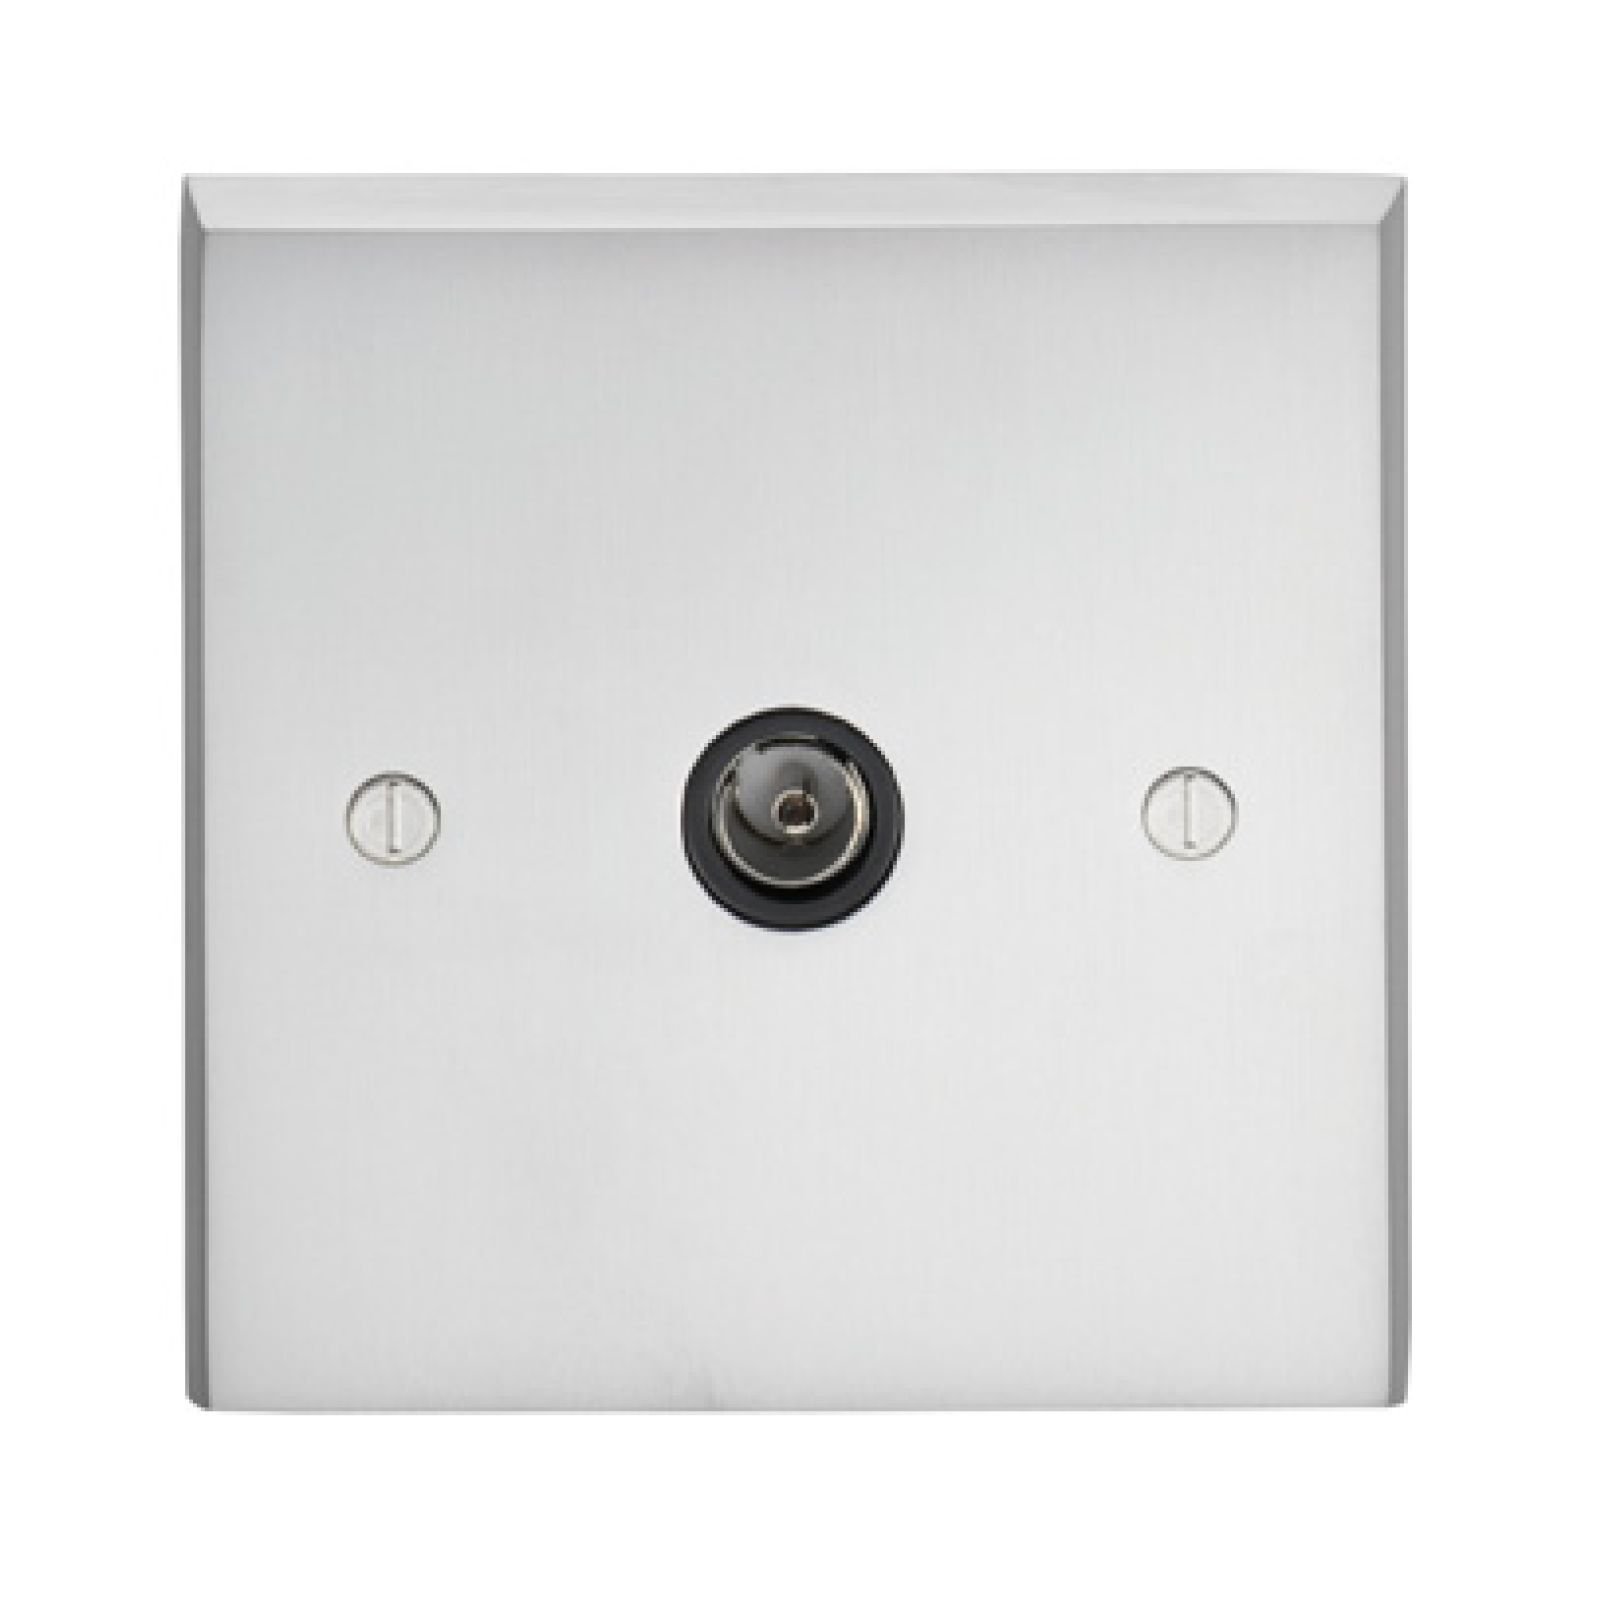 1 Gang TV Outlet in brass, chrome or satin chrome